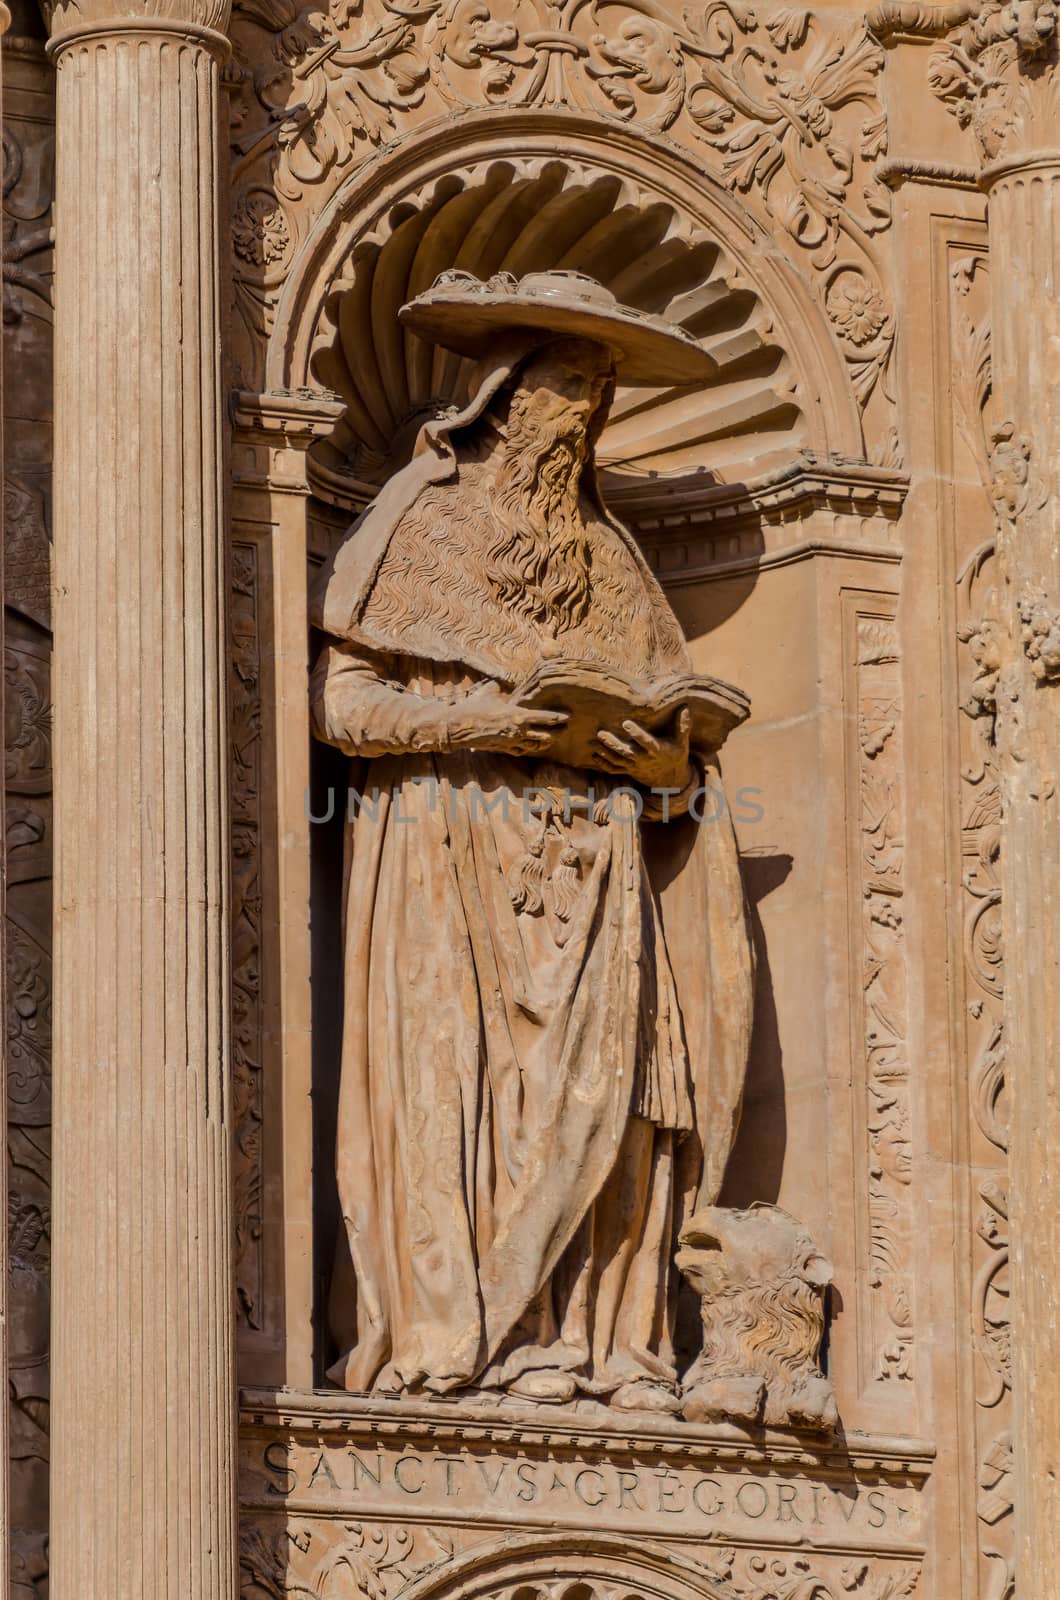 Details of San Gregorius sculpture on building in Spain by Nanisimova